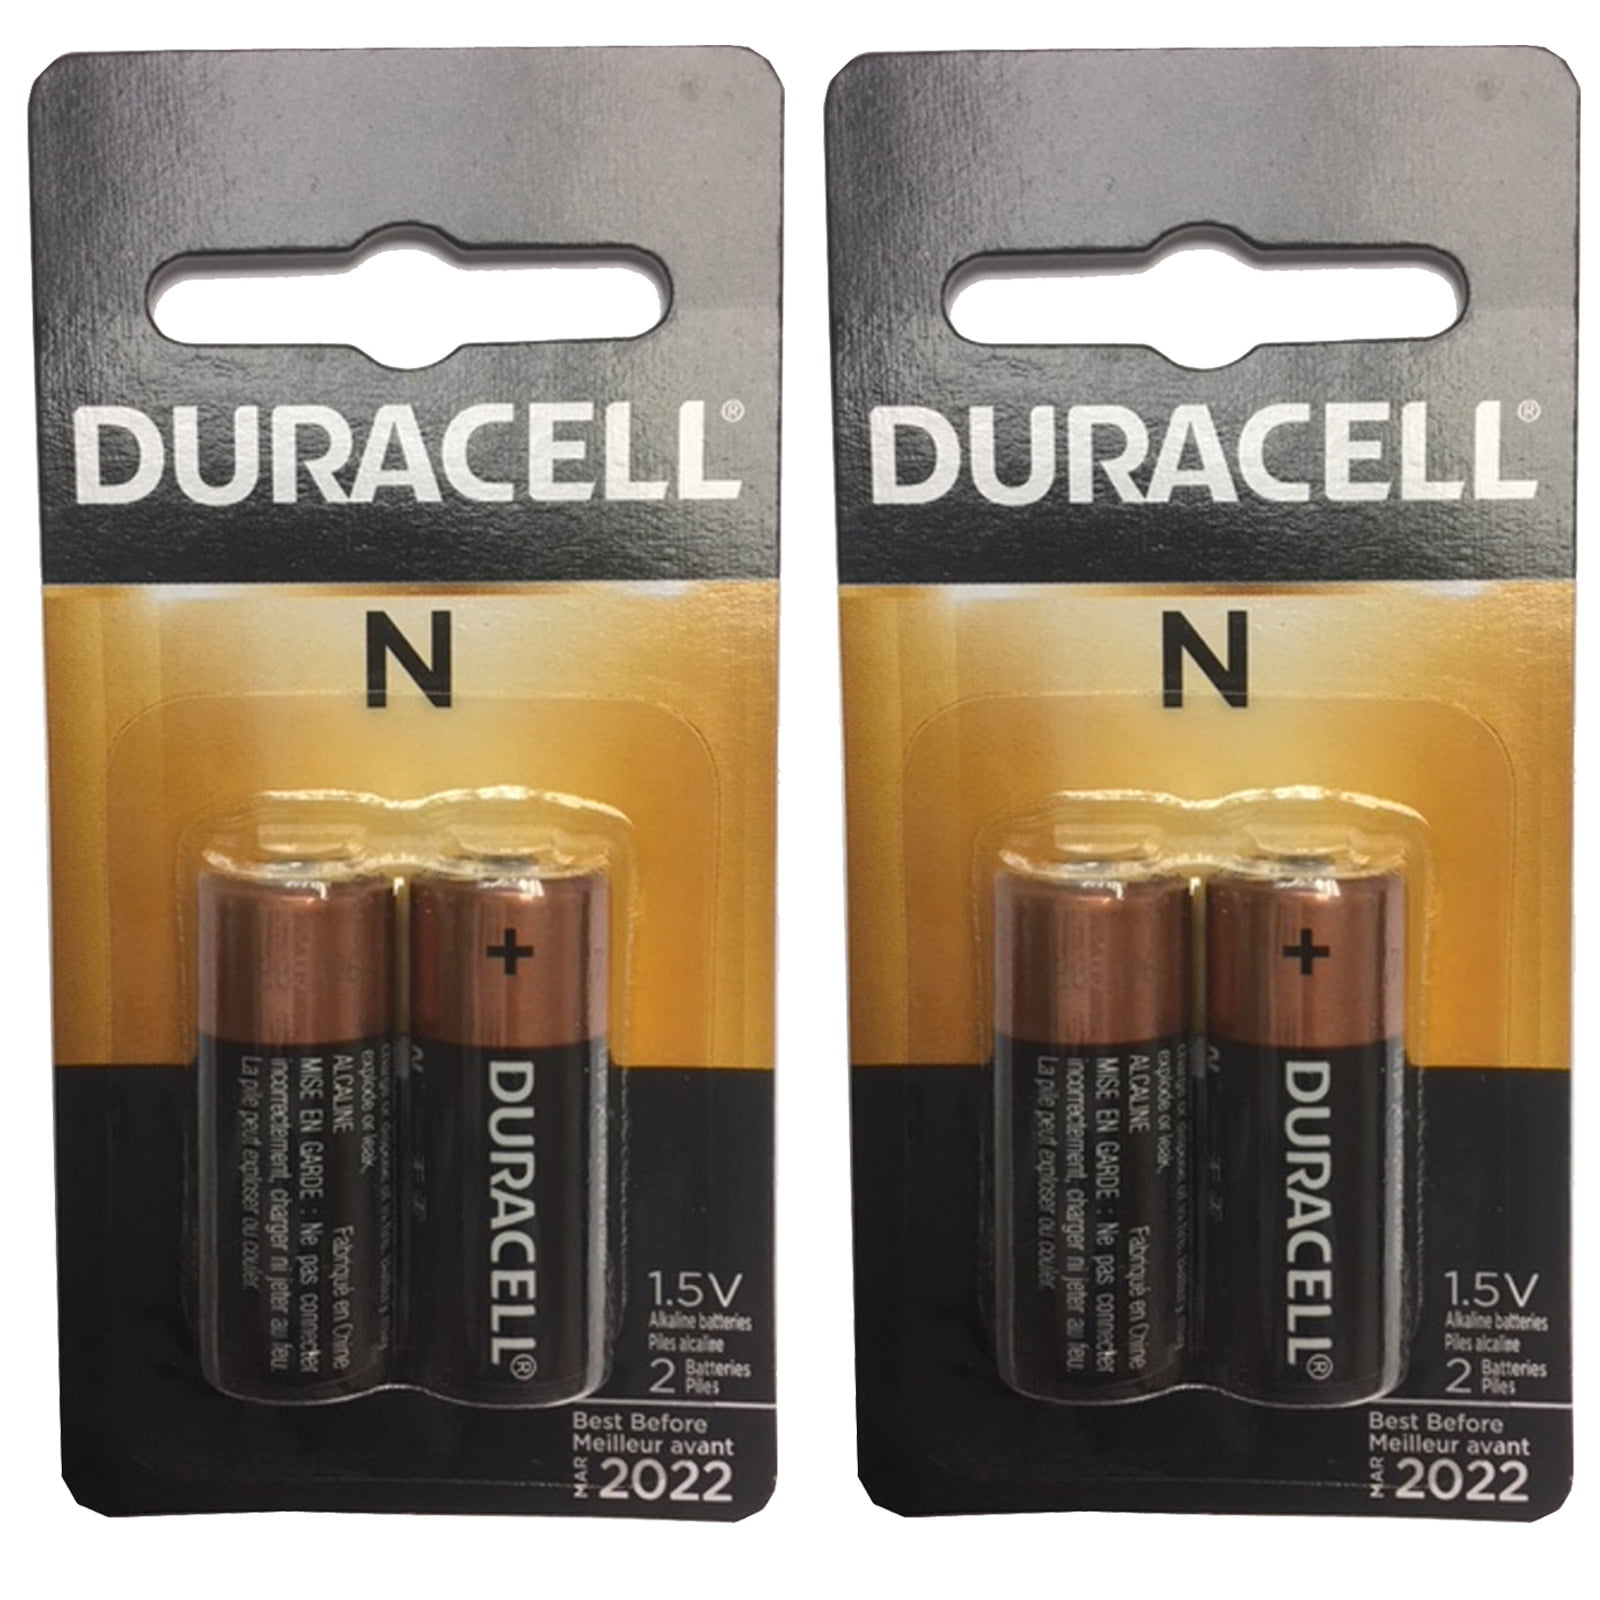 Basics vs Duracell Batteries: Which Is Best? 